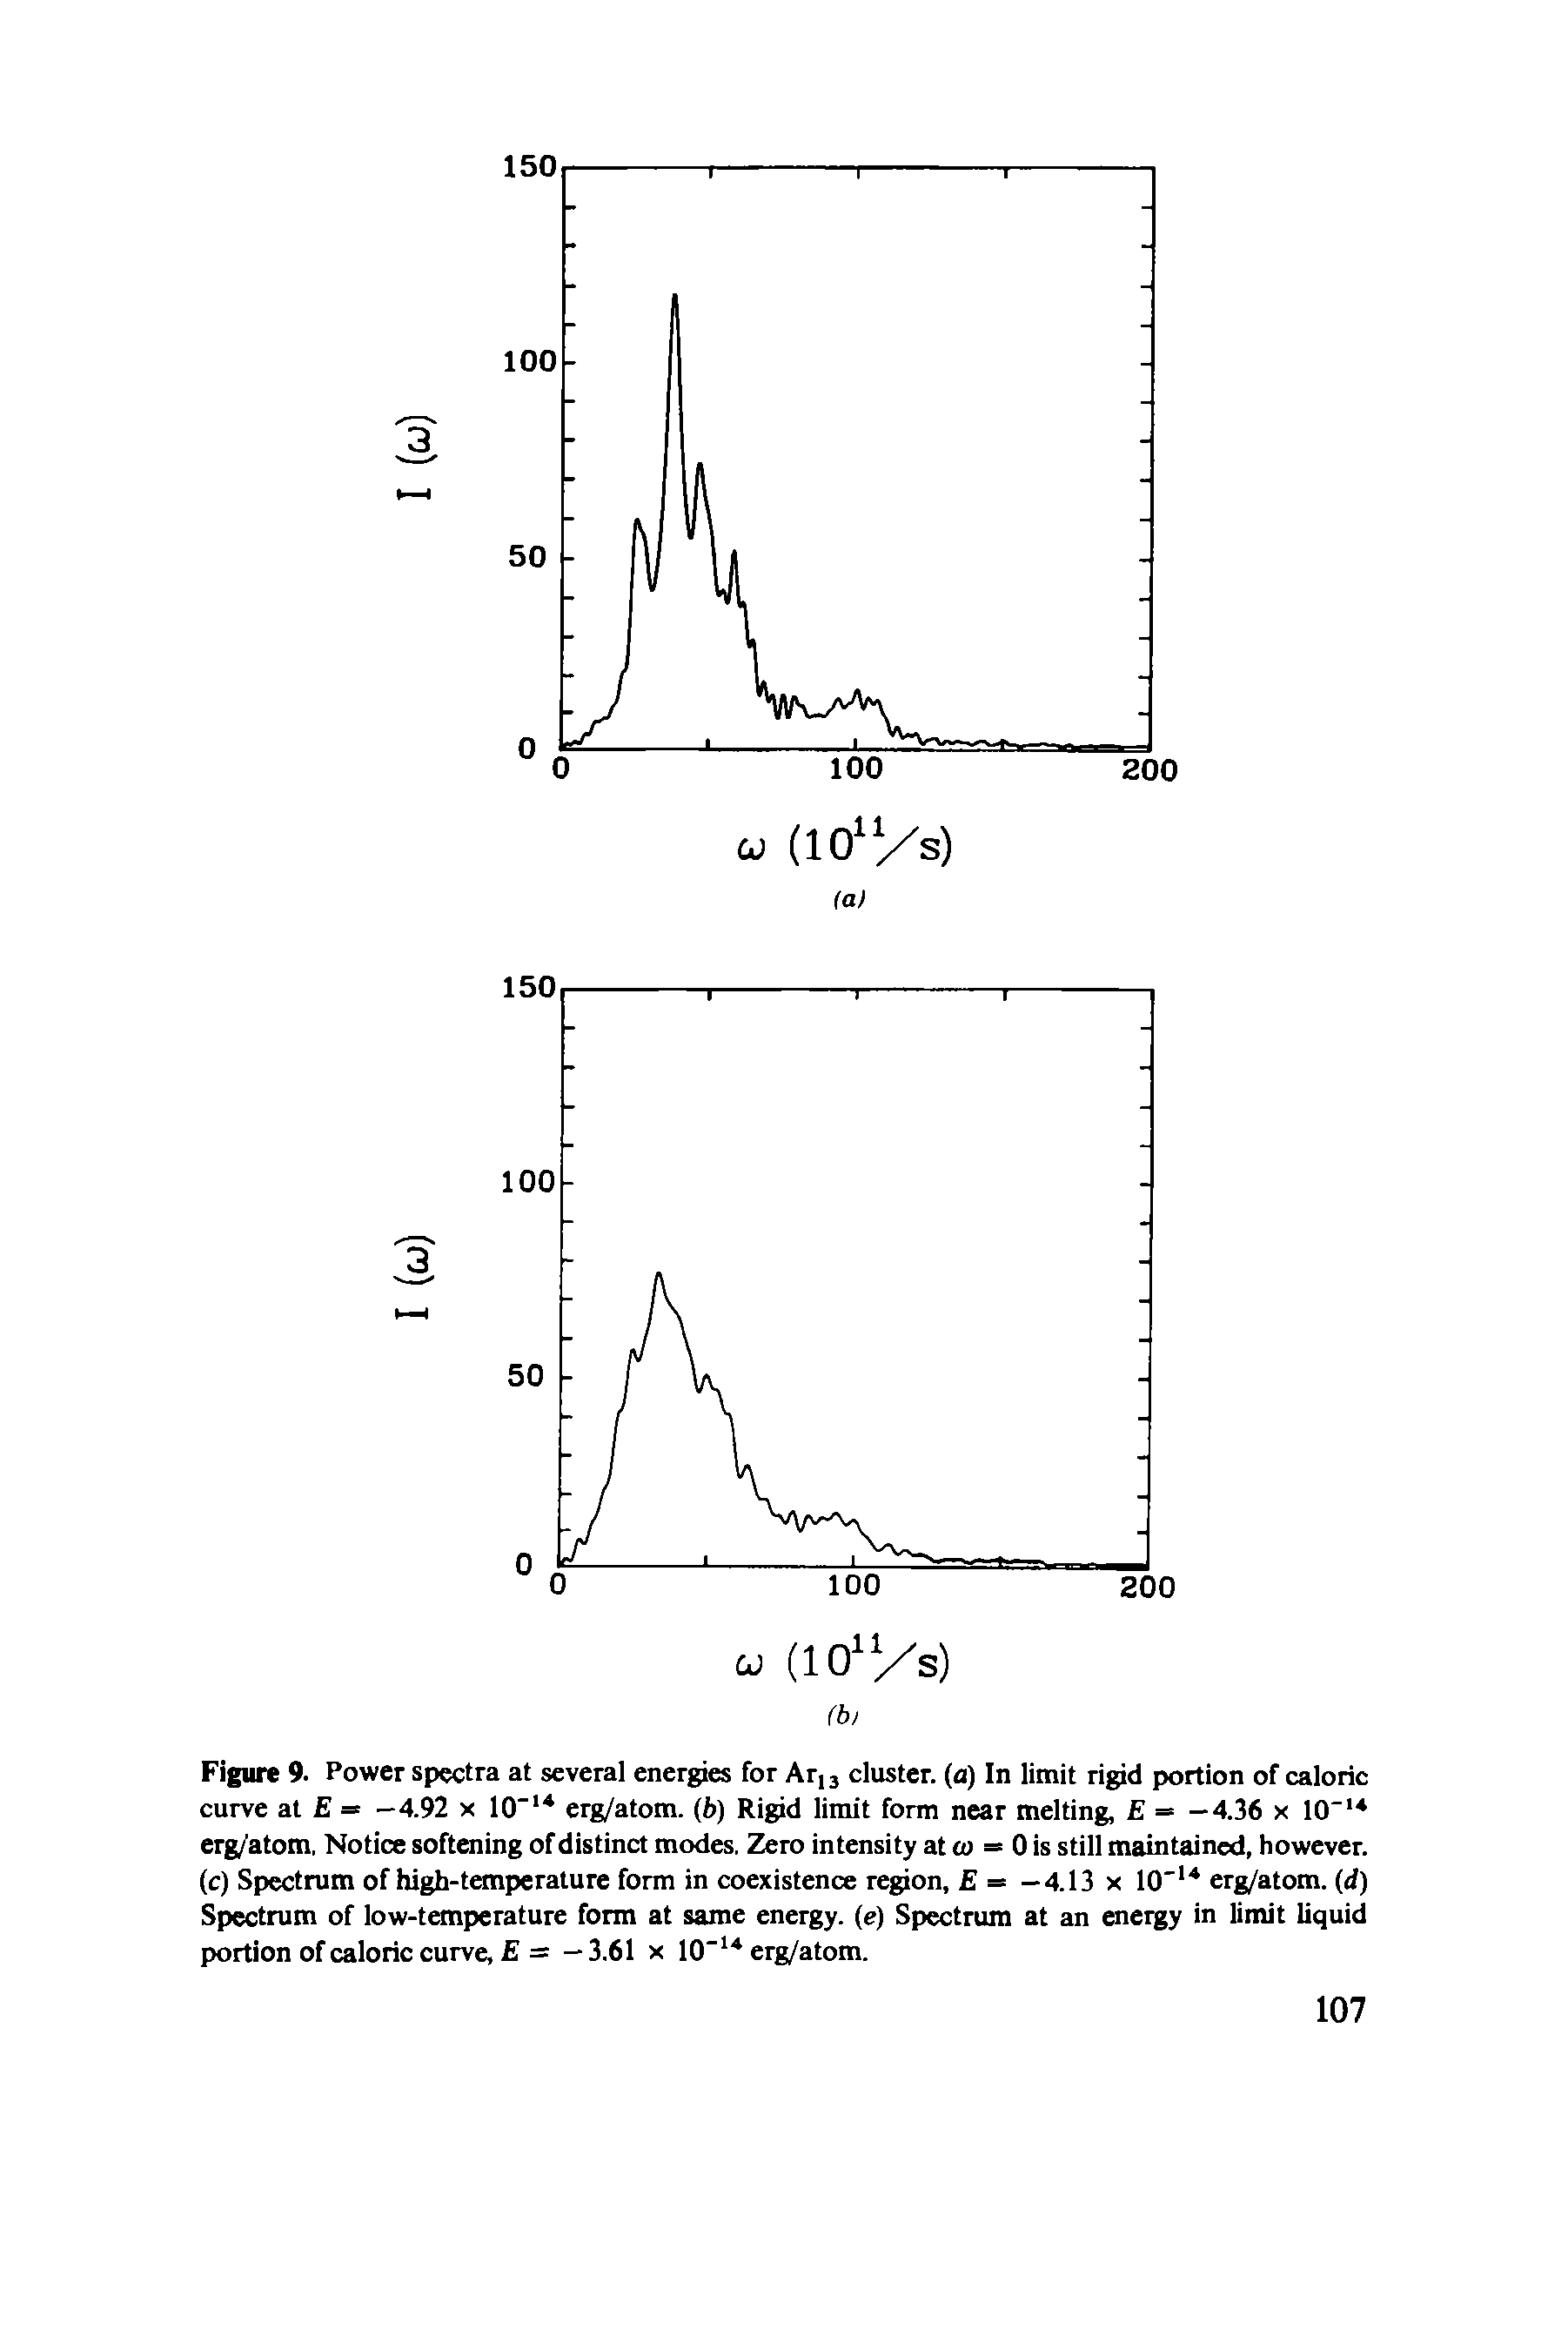 Figure 9. Power spectra at several energies for Ar,3 cluster, (a) In limit rigid portion of caloric curve at = —4.92 x 10" erg/atom. (b) Rigid limit form near melting, = —4.36 x 10 erg/atom. Notice softening of distinct modes. Zero intensity at cu = 0 is still maintained, however, (c) Spectrum of high-temperature form in coexistence region, = —4.13 x 10" erg/atom. (d) Spectrum of low-temperature form at same energy, (e) Spectrum at an energy in limit liquid portion of caloric curve, = -3.61 x 10 erg/atom.